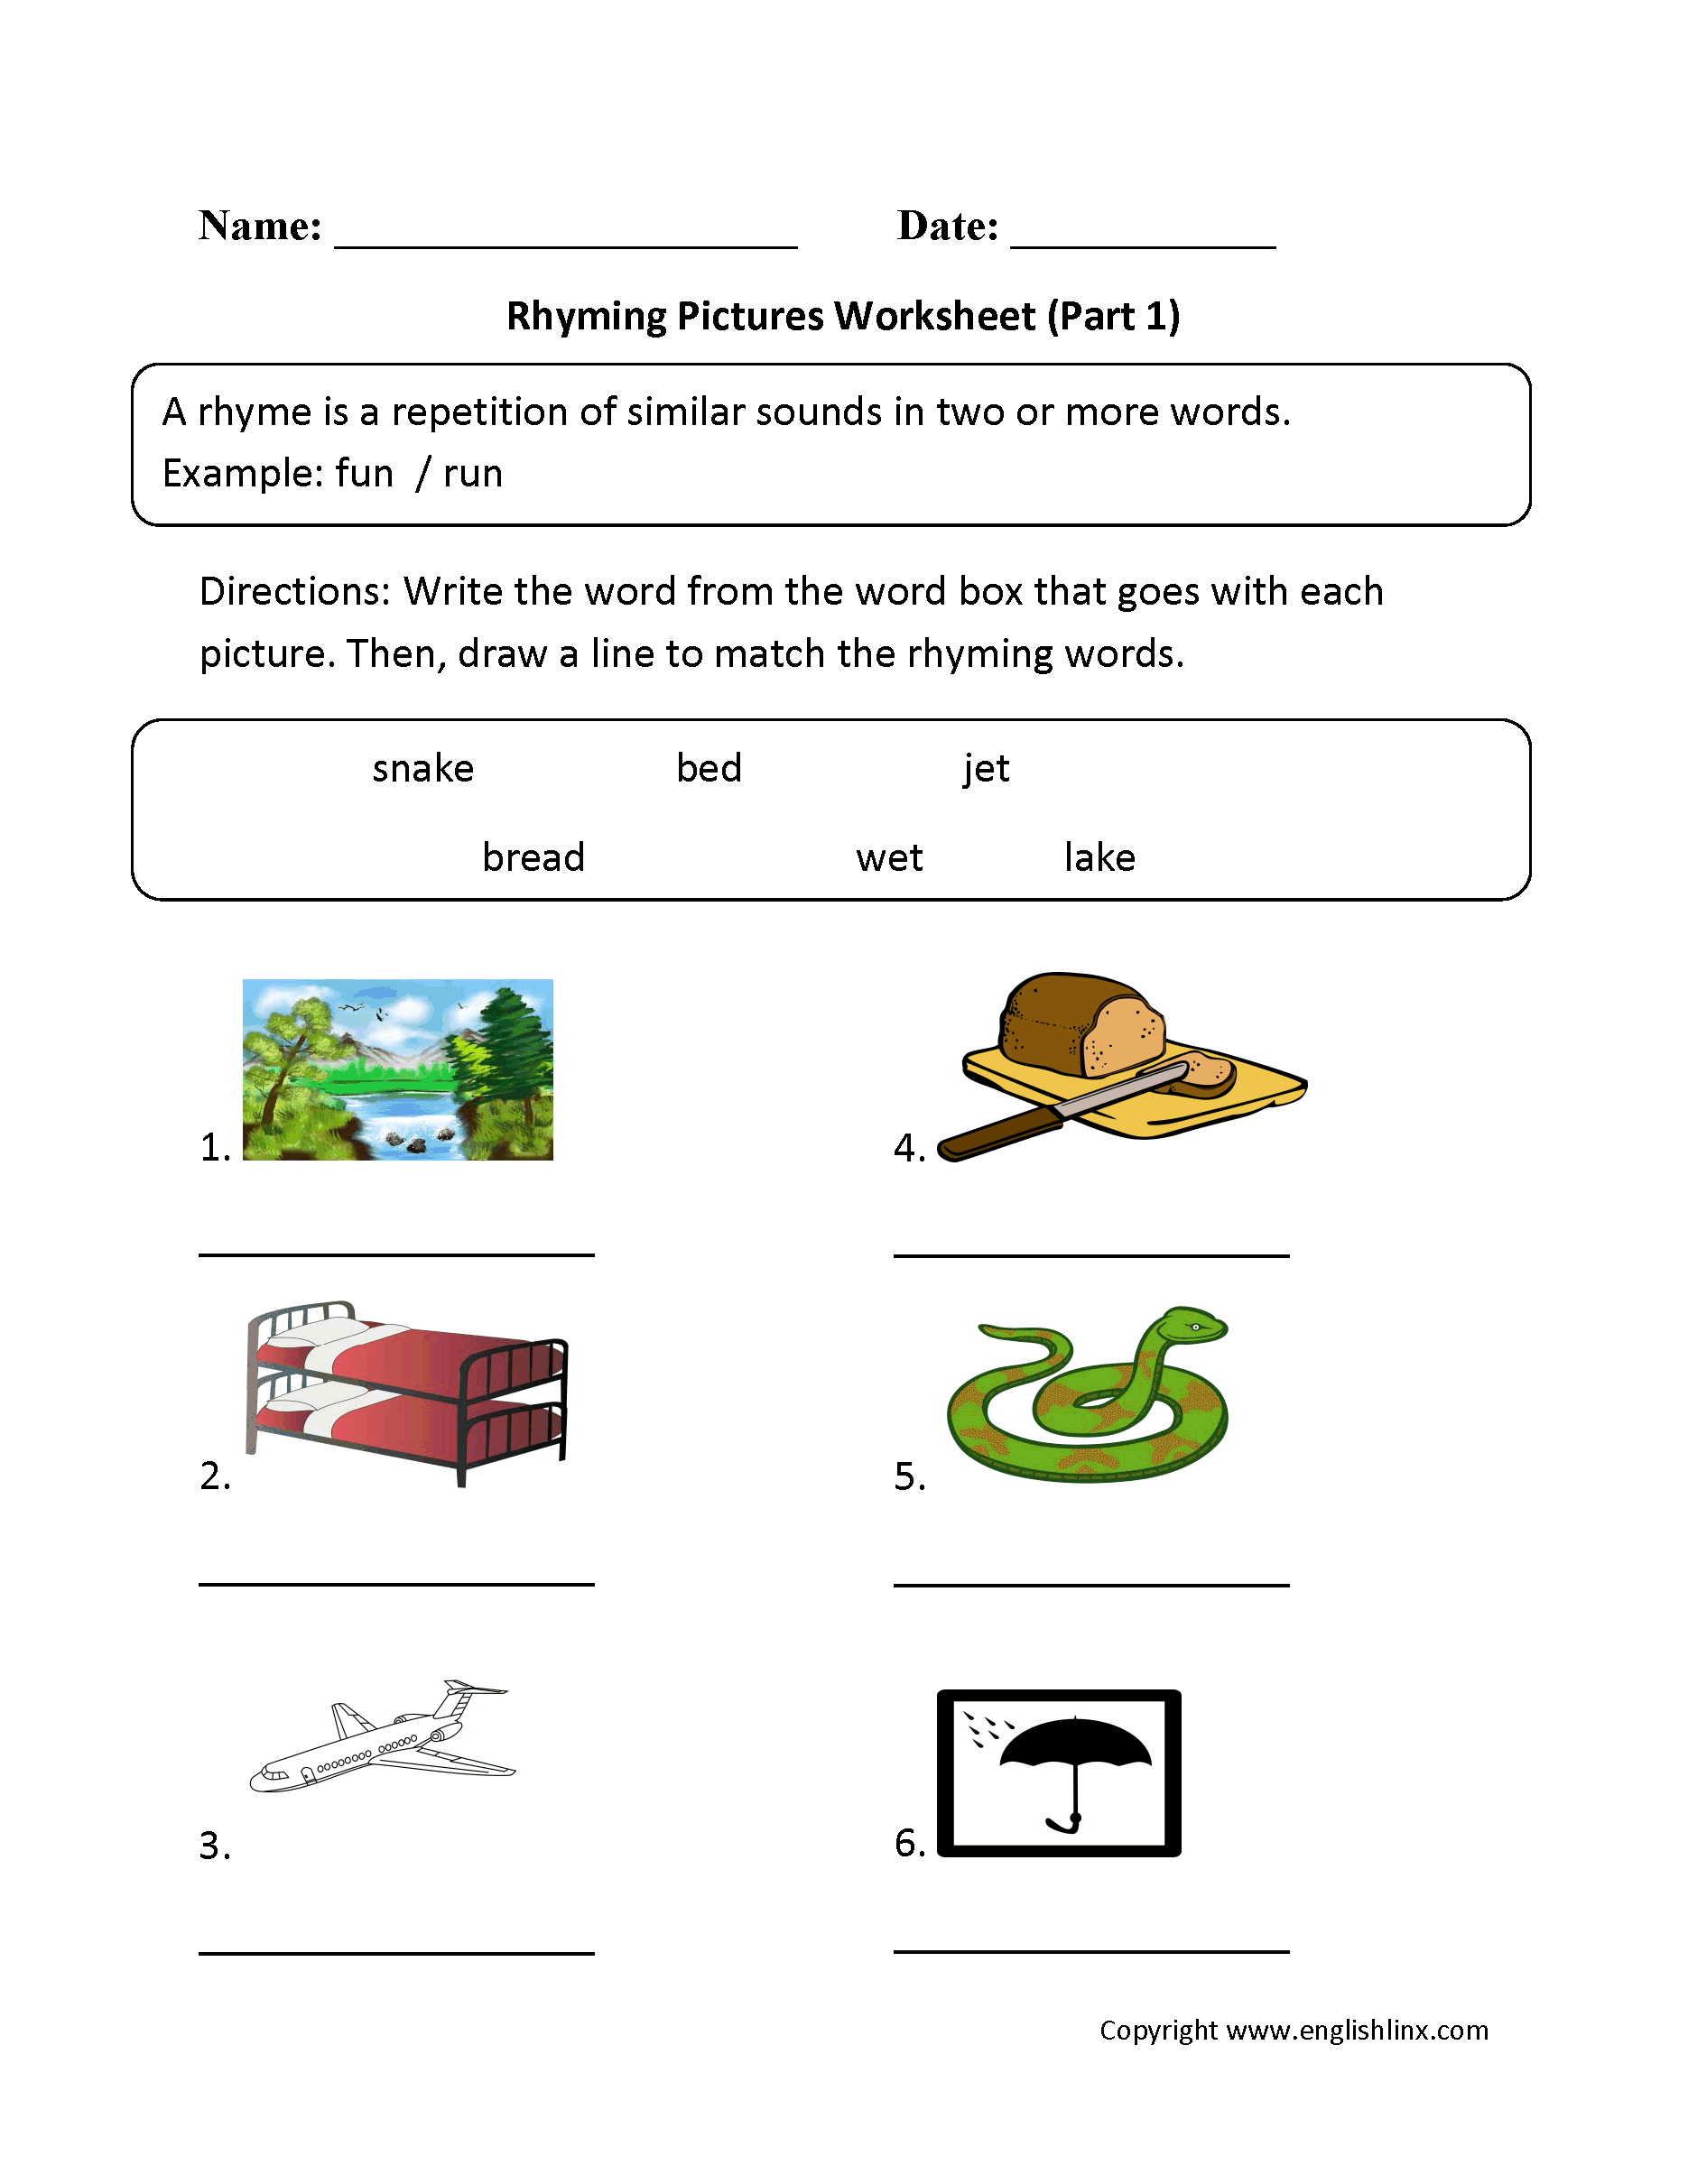 Rhyming Pictures Worksheets Part 1